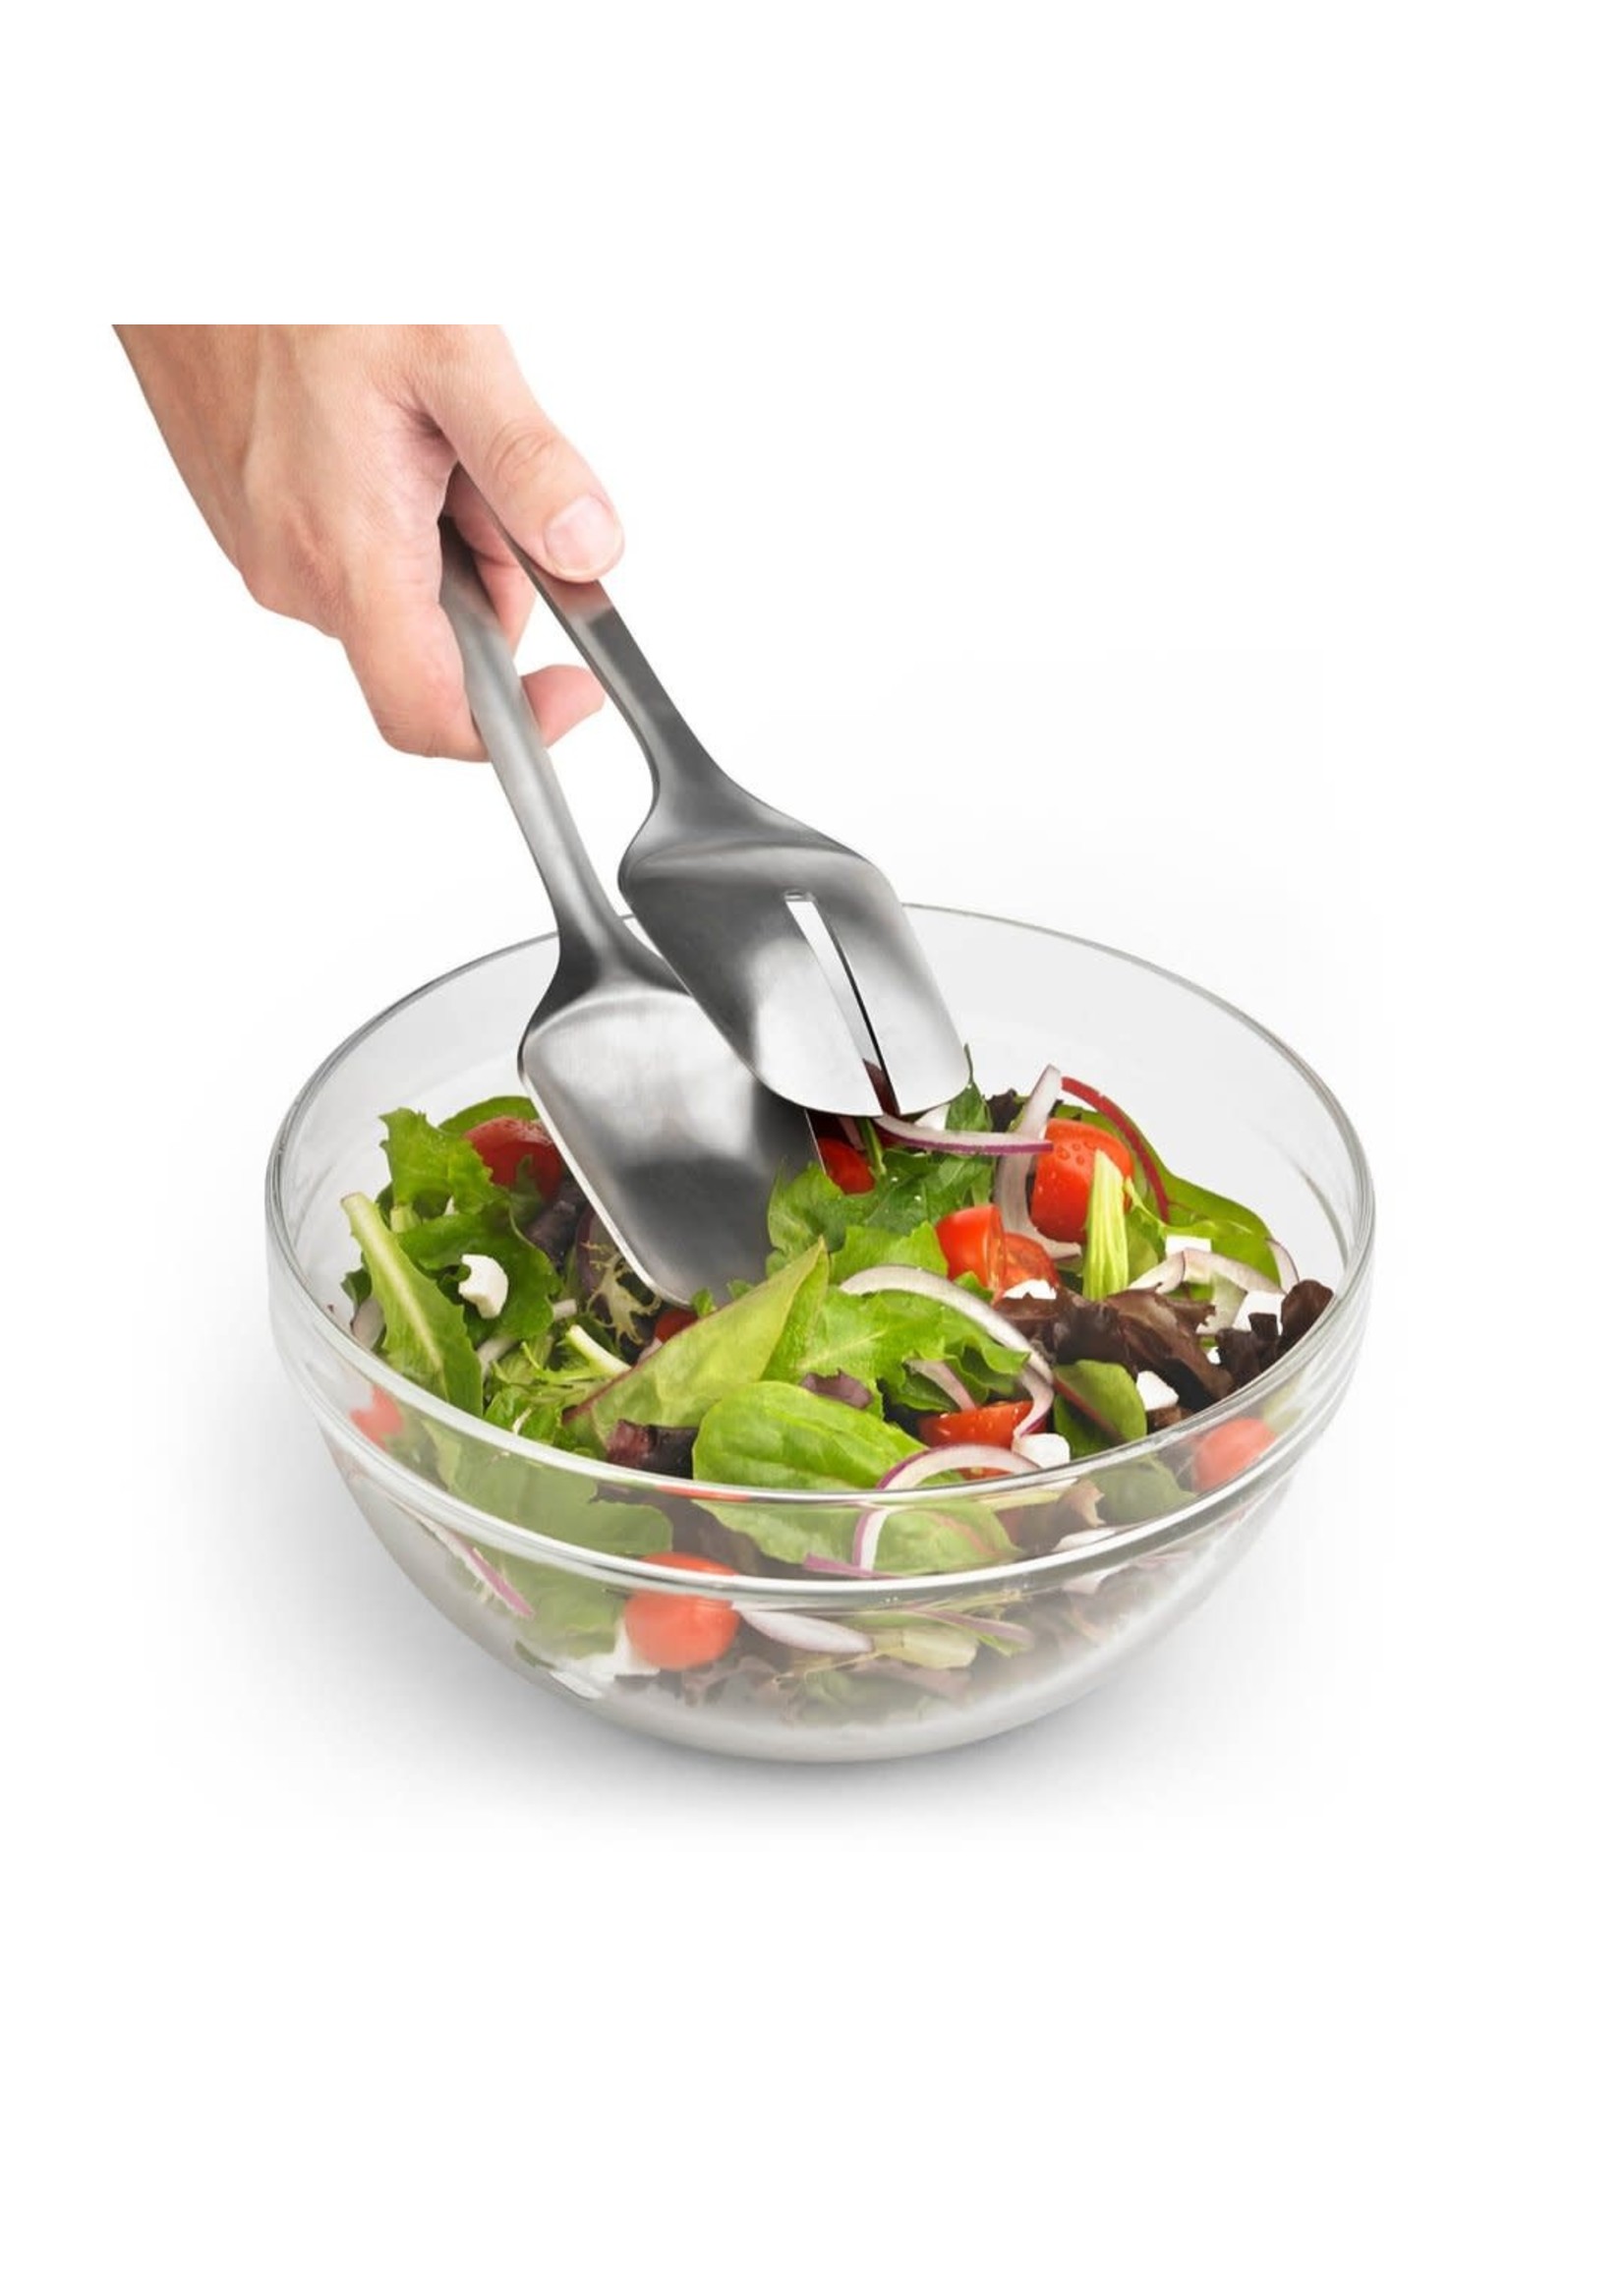 https://cdn.shoplightspeed.com/shops/617932/files/39089367/1652x2313x2/browne-cuisipro-cuisipro-stainless-salad-tongs.jpg